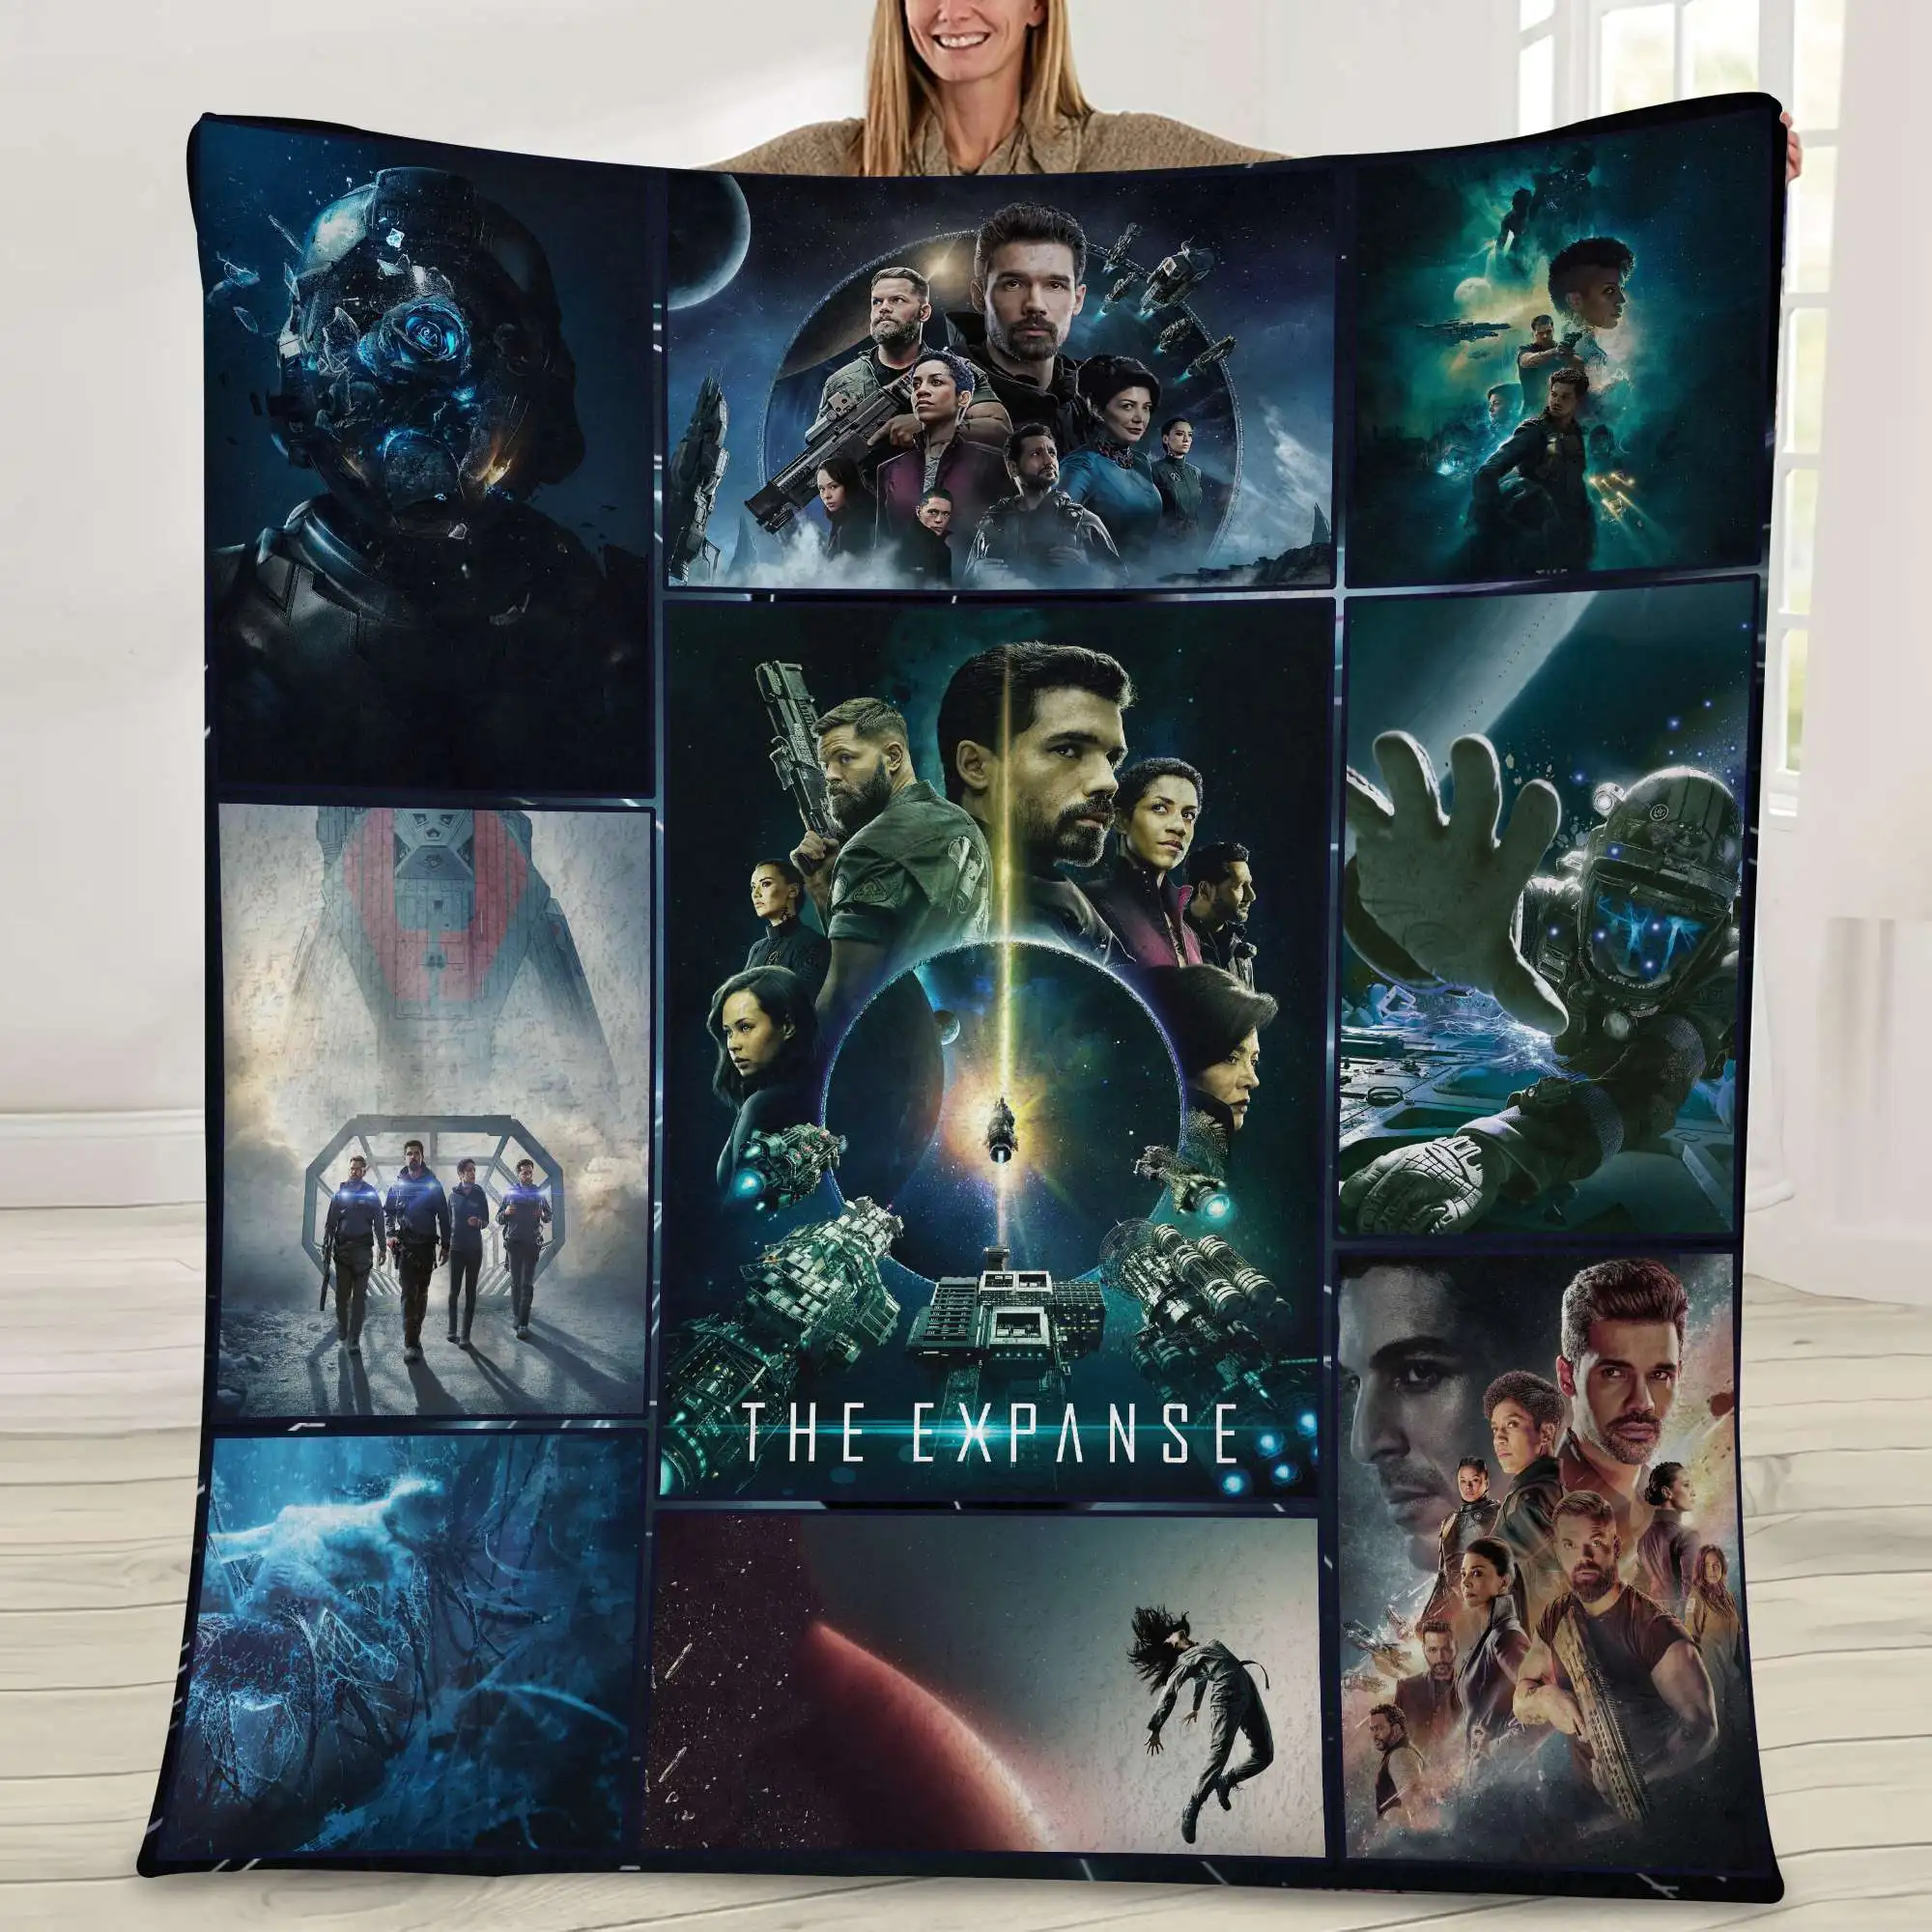 

Movie Collection Throw Blanket Twilight Riverdale Vampire This Is My Watching Blanket Stranger Things Sofa Cover Bedspread